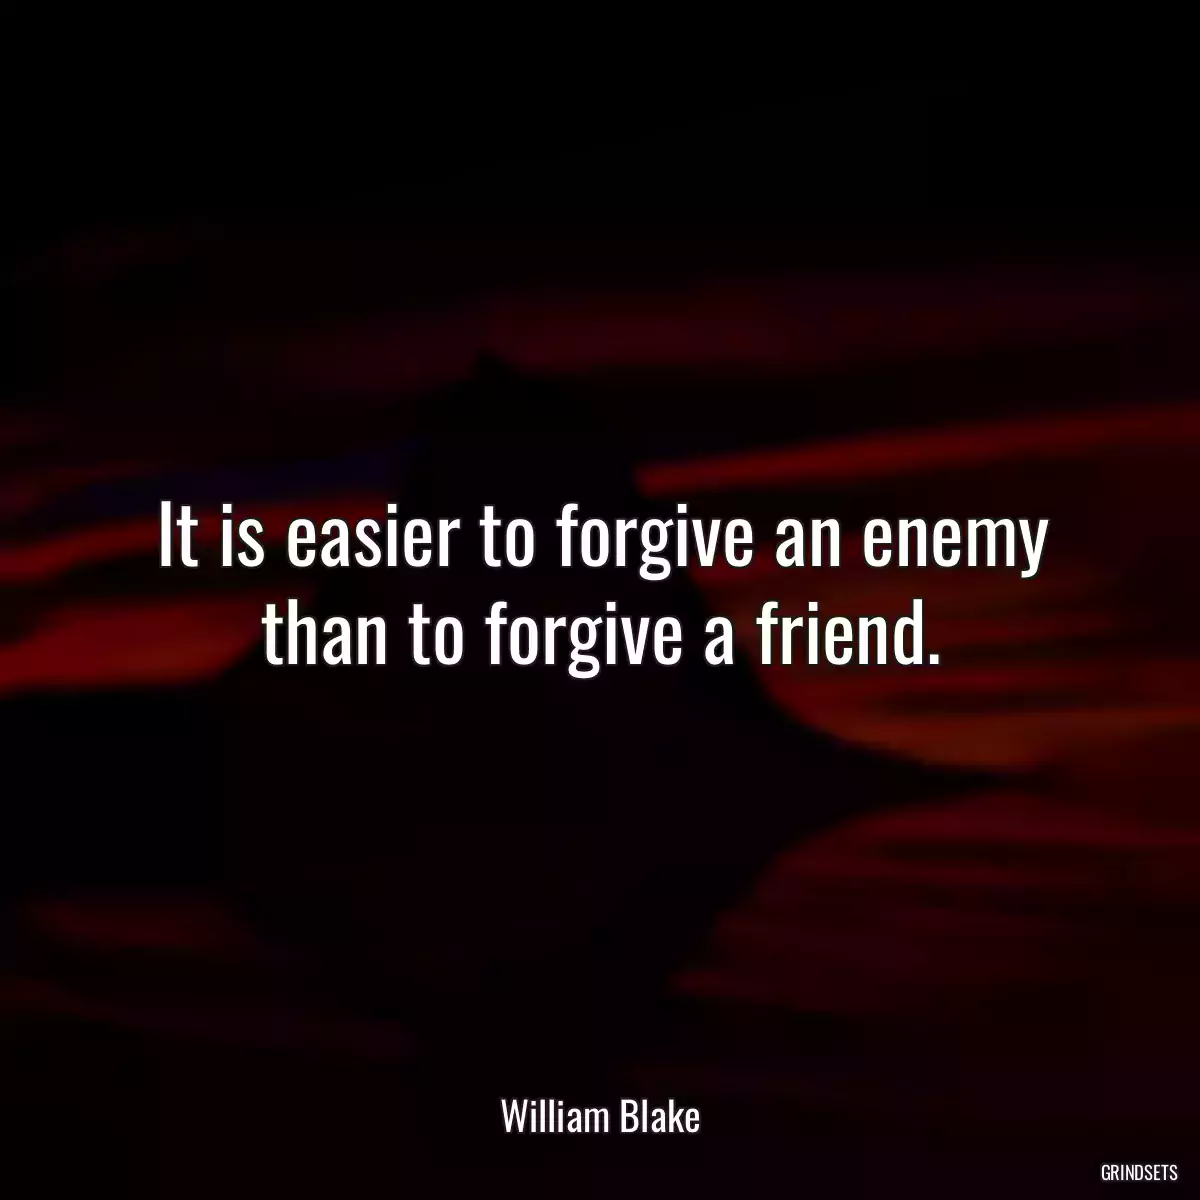 It is easier to forgive an enemy than to forgive a friend.